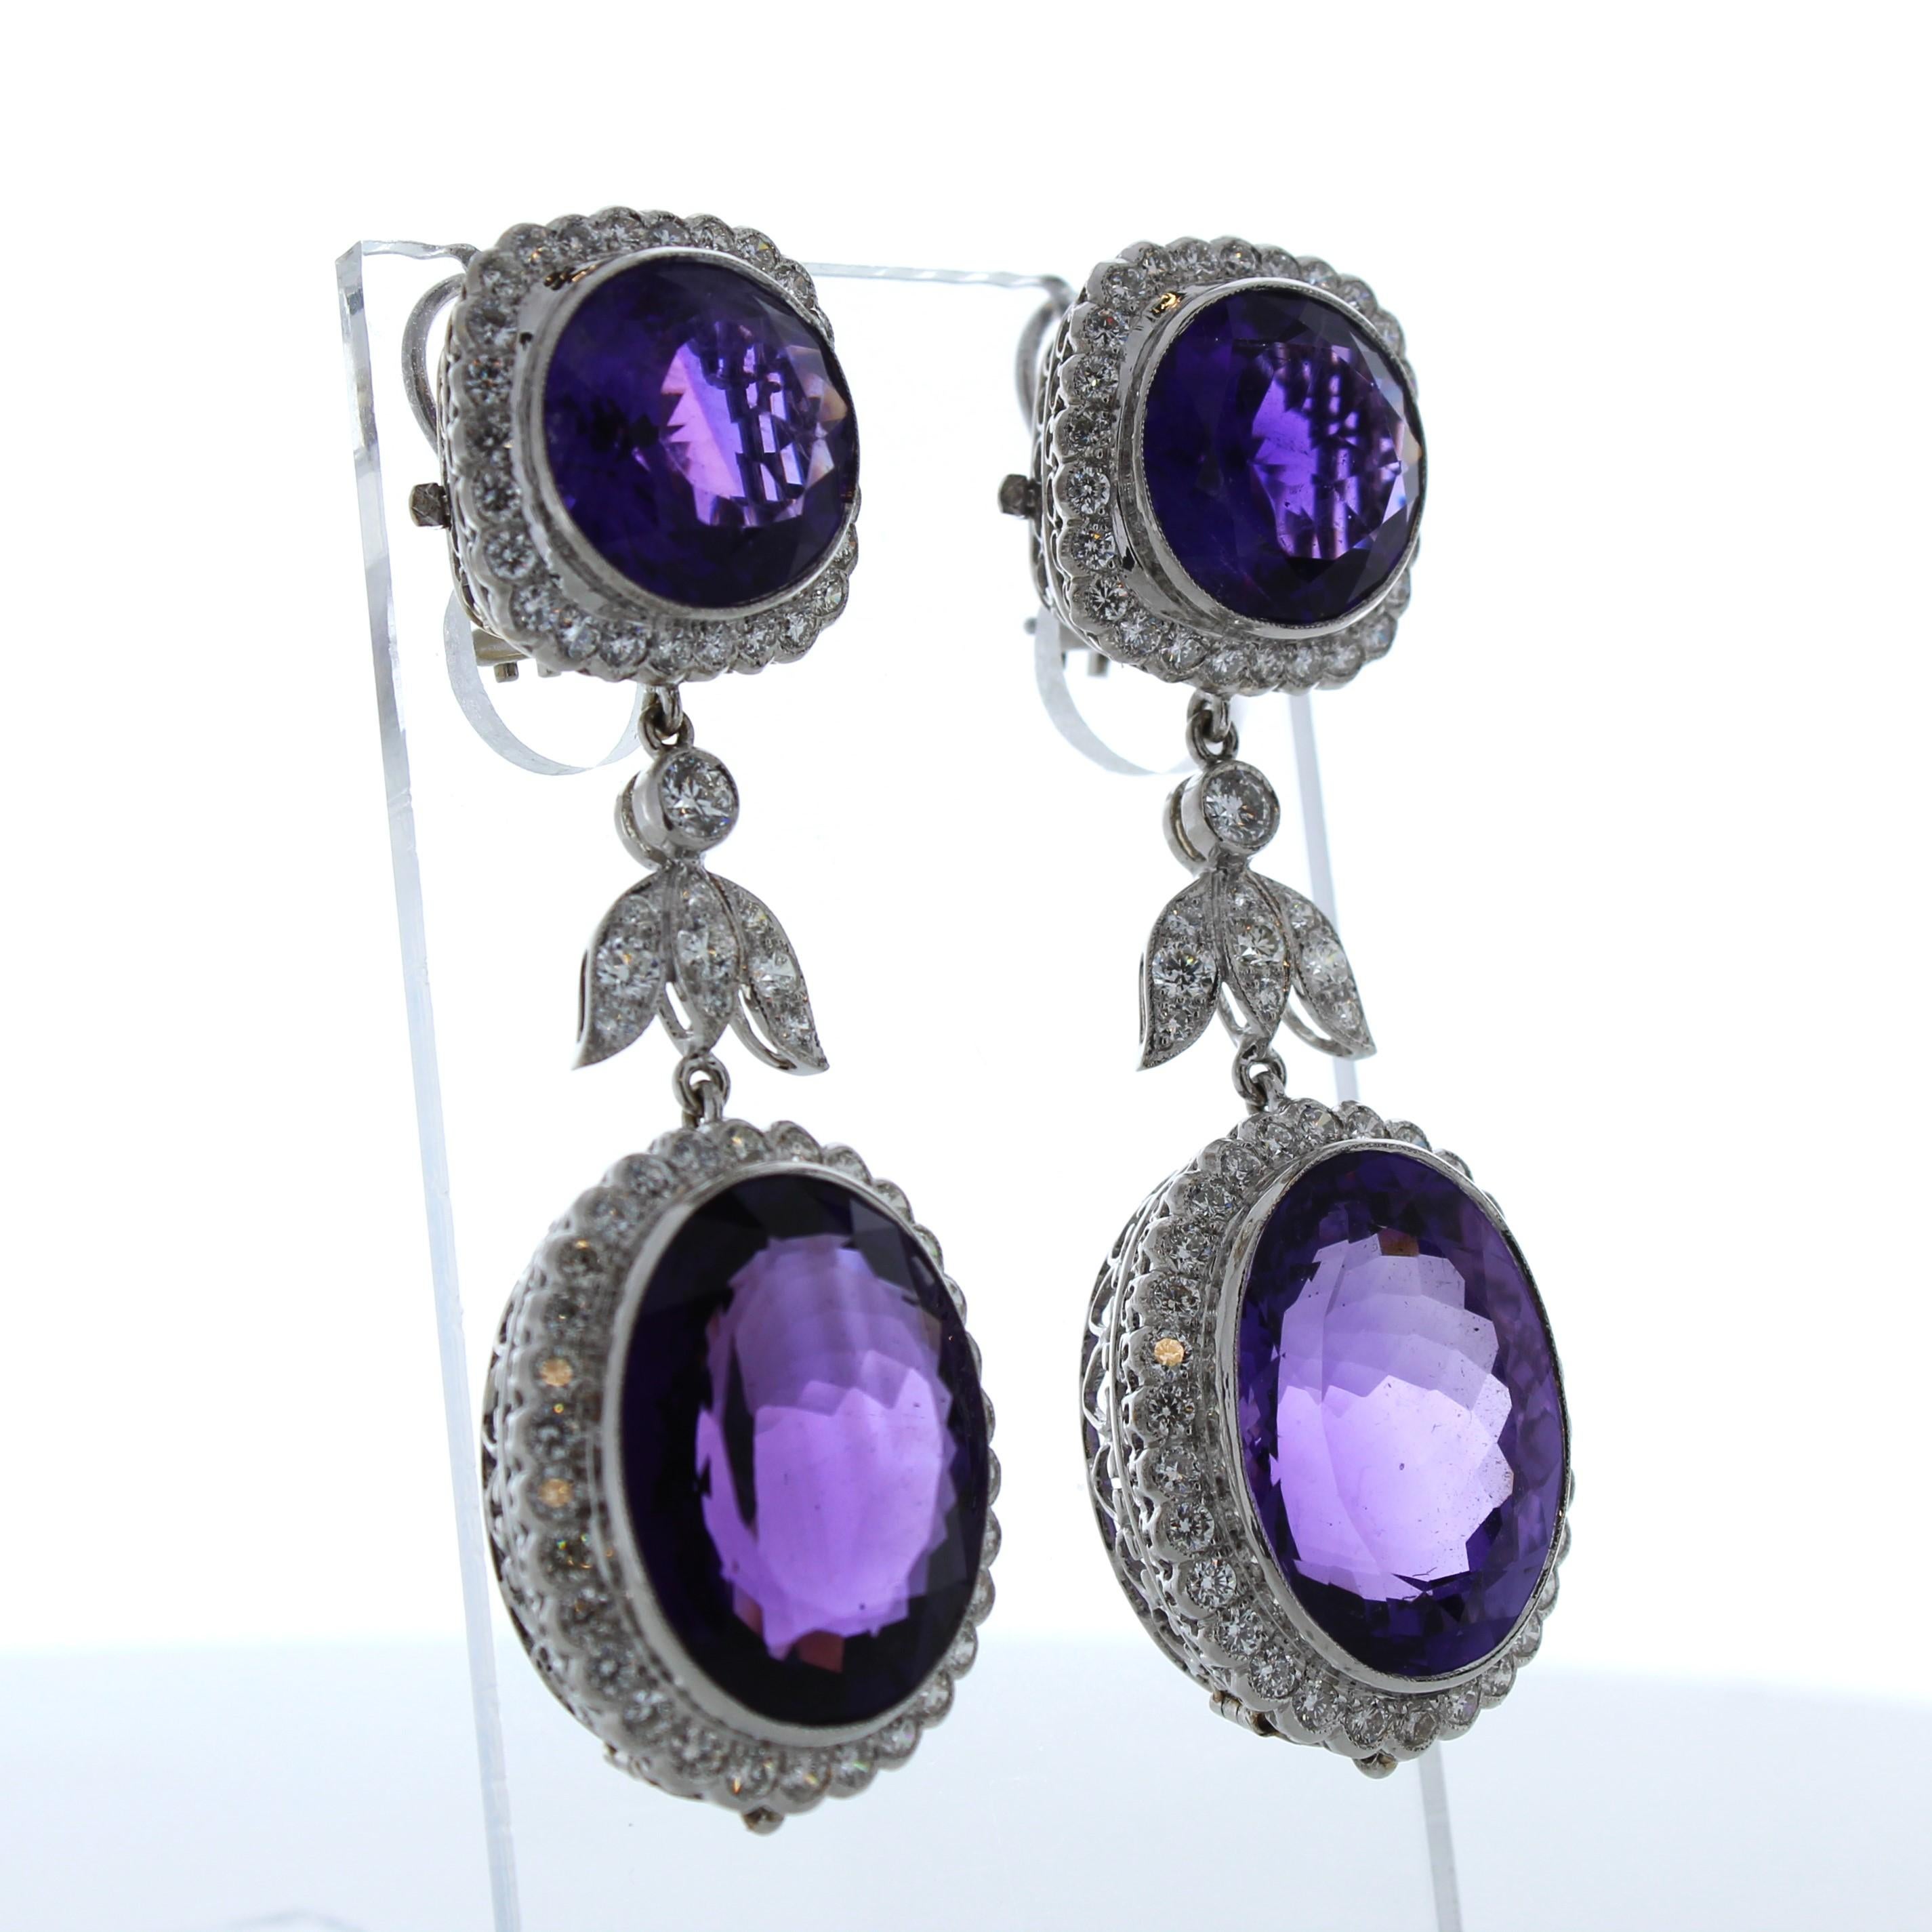 Oval-cut amethyst as the main stone with a substantial weight of 25.00 carats. The purple color of the amethyst adds a vibrant and elegant touch. Additionally, there are round diamonds serving as side stones, with a total quantity of 132 and a